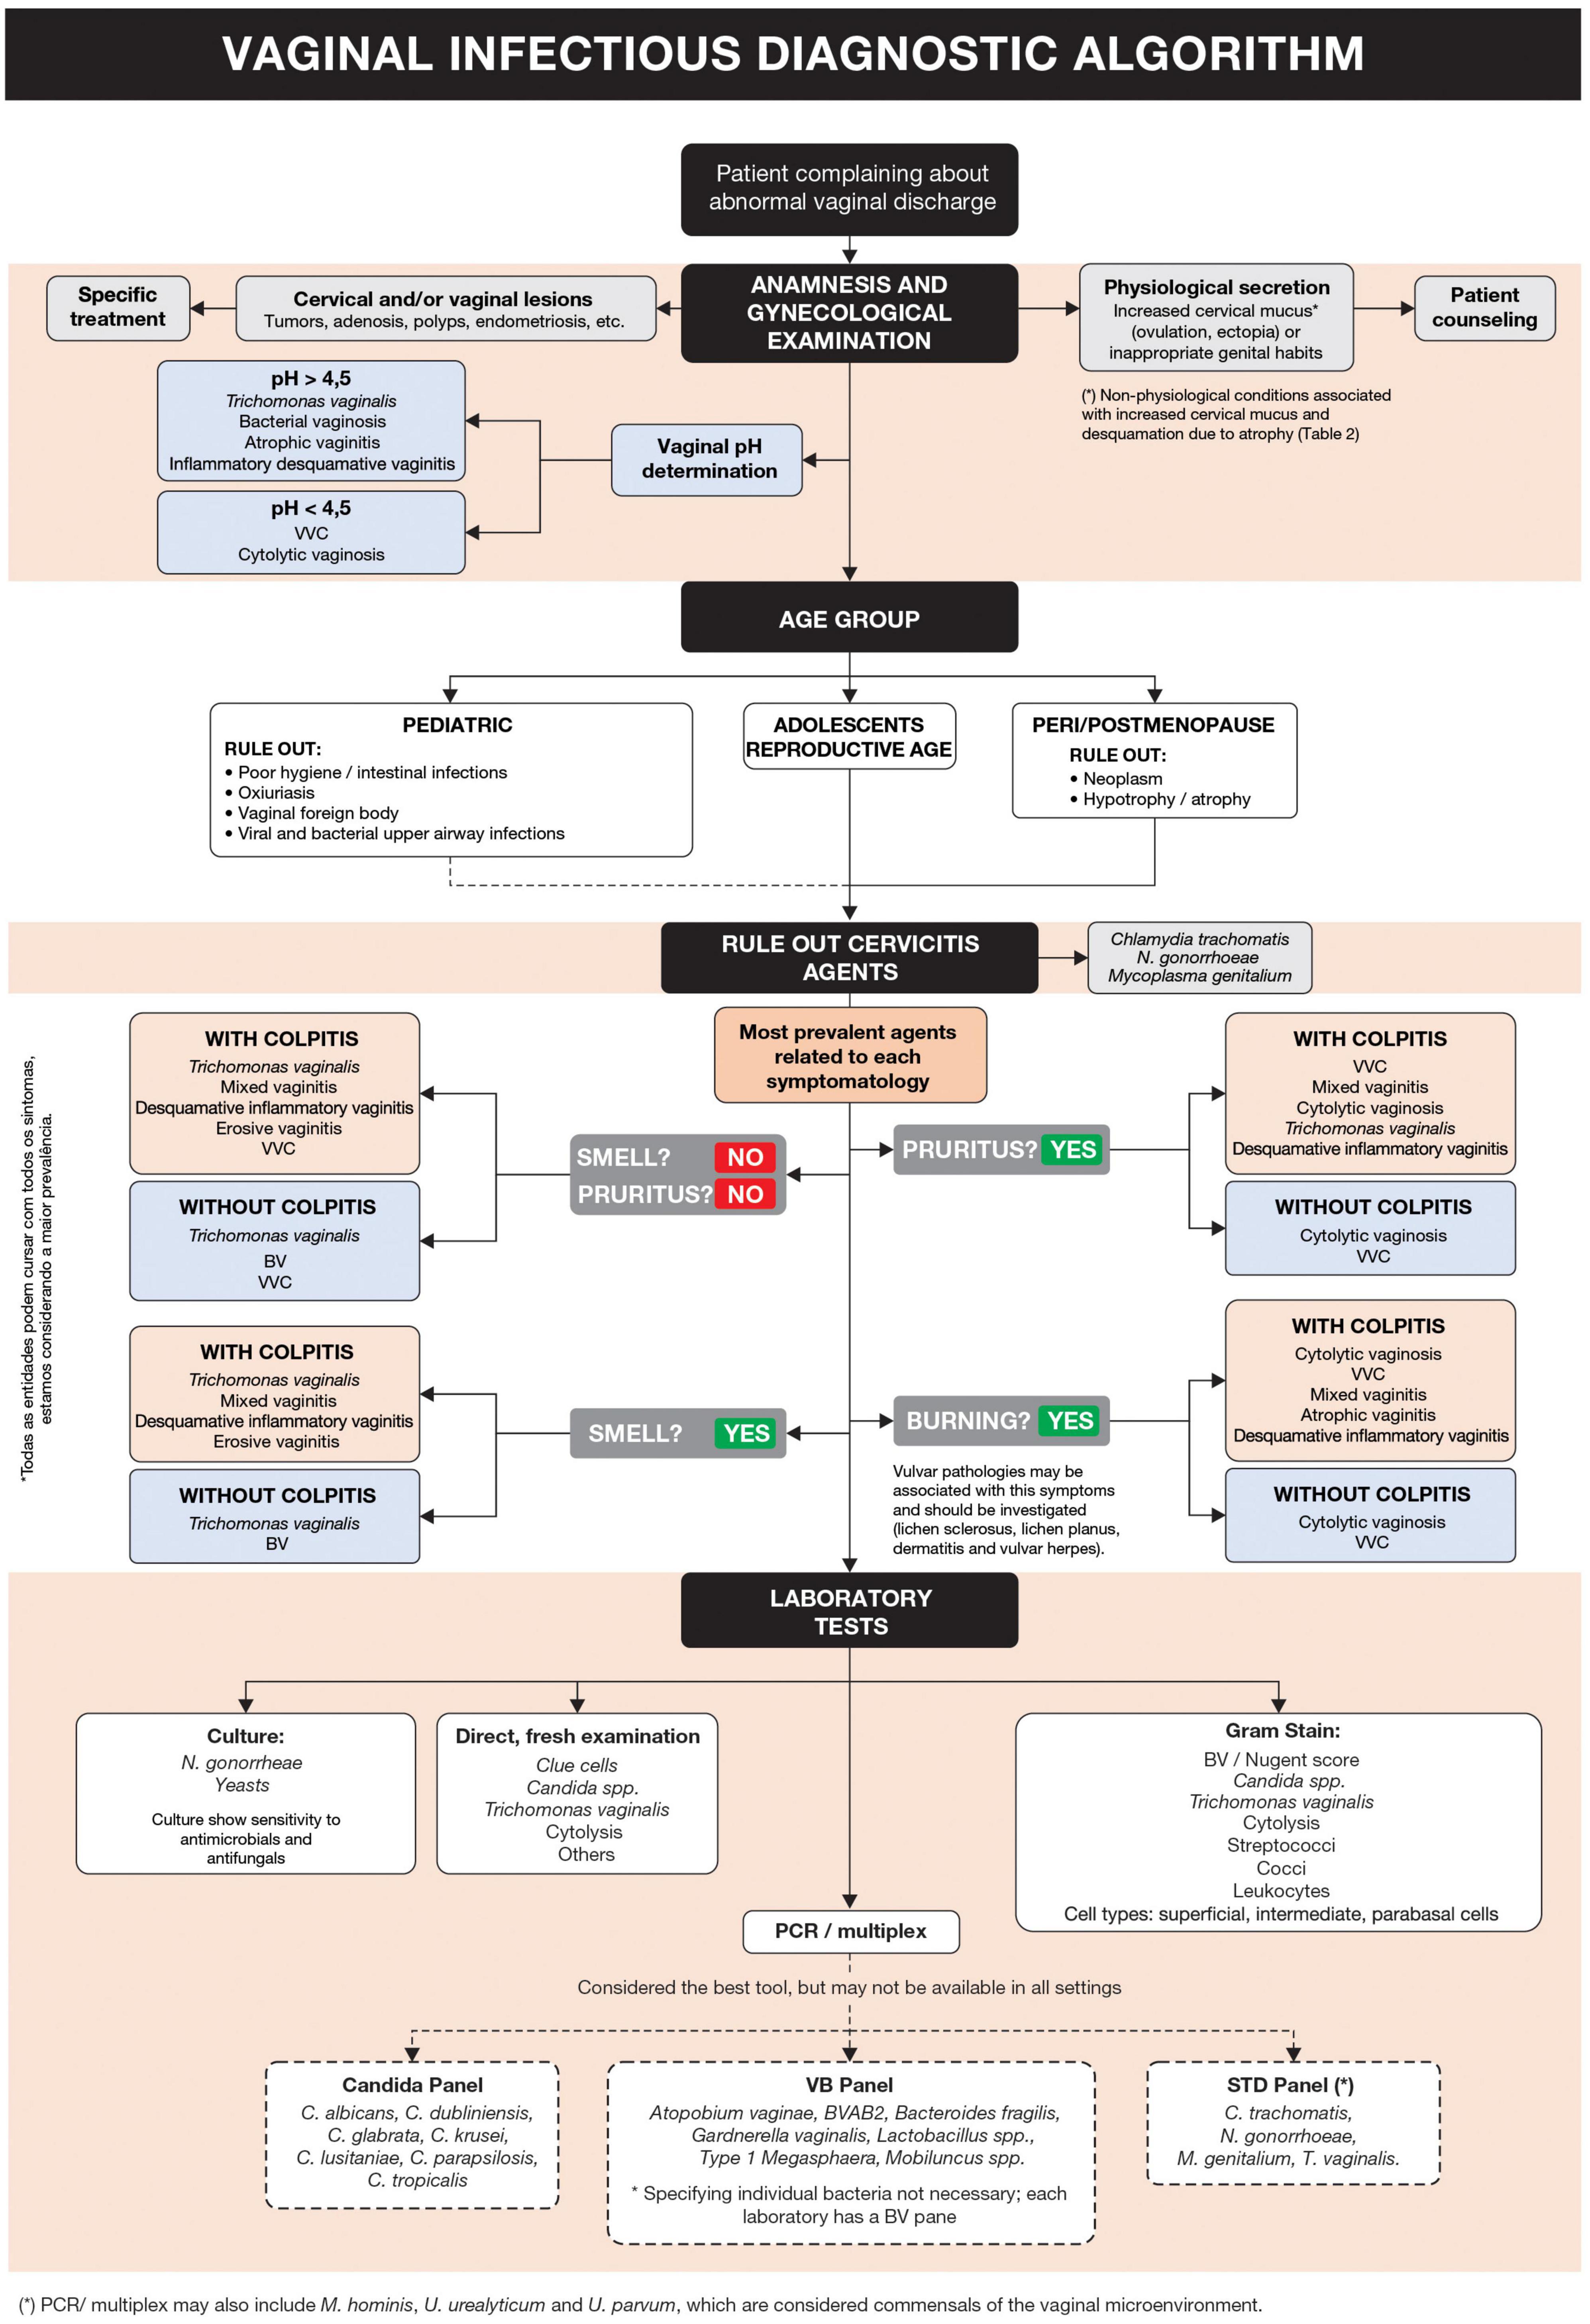 Frontiers  Diagnosis and treatment of infectious vaginitis: Proposal for a  new algorithm